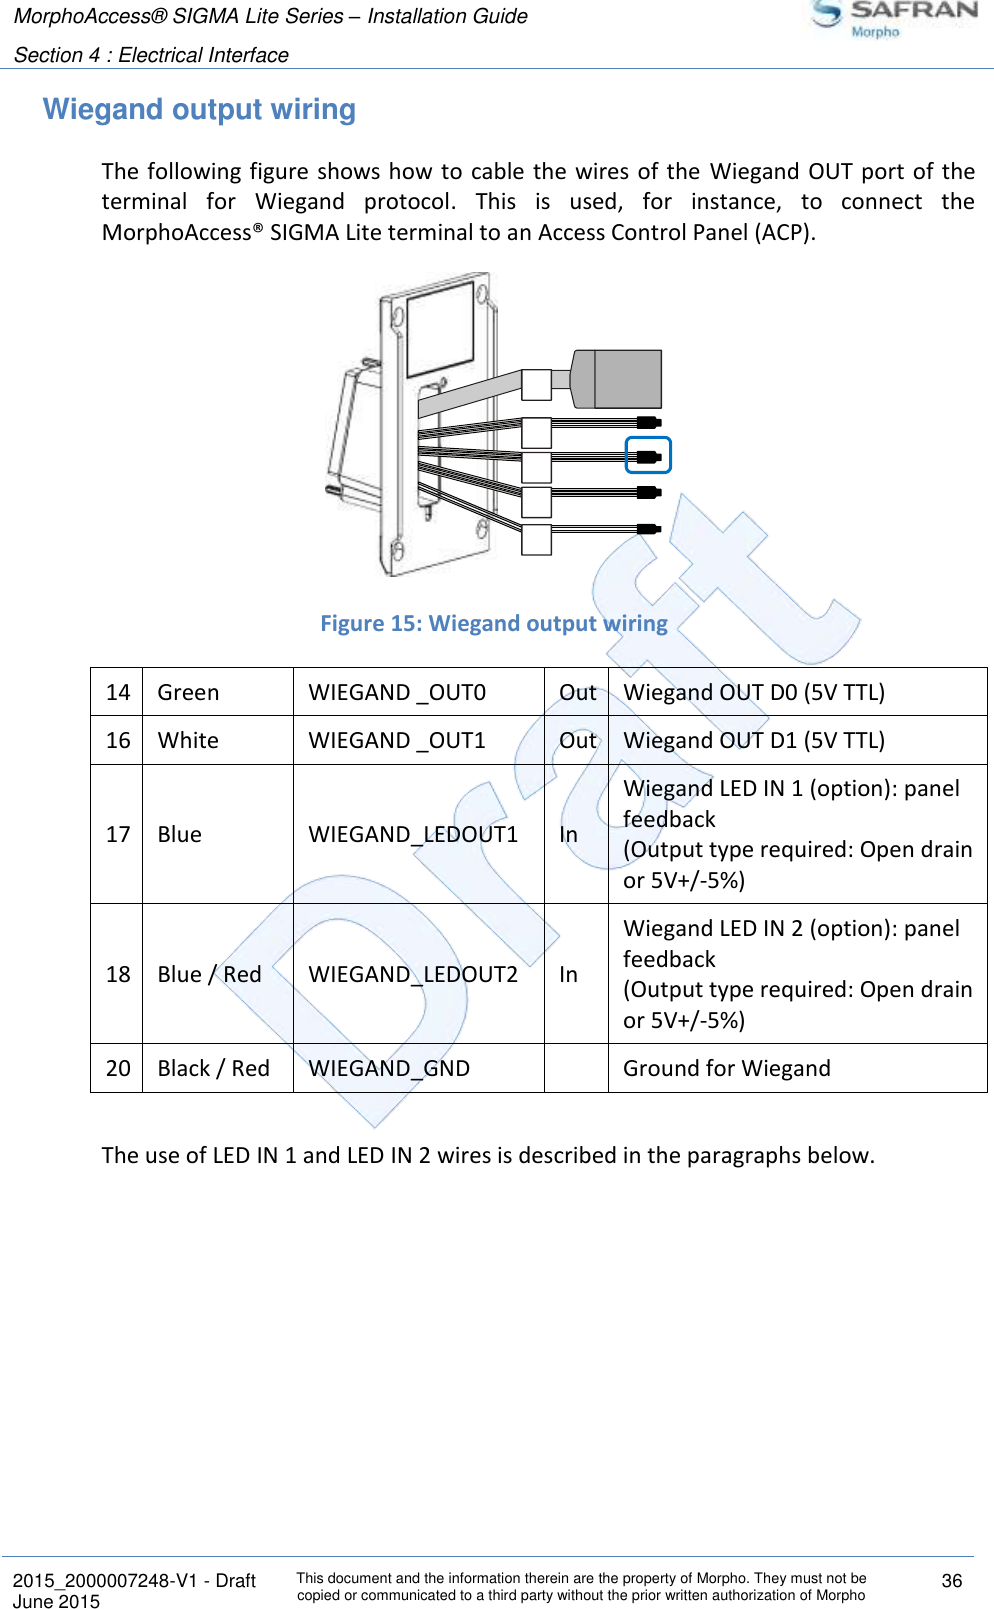 MorphoAccess® SIGMA Lite Series – Installation Guide  Section 4 : Electrical Interface   2015_2000007248-V1 - Draft This document and the information therein are the property of Morpho. They must not be copied or communicated to a third party without the prior written authorization of Morpho 36 June 2015   Wiegand output wiring The following figure shows how to  cable the  wires of the  Wiegand OUT port  of the terminal  for  Wiegand  protocol.  This  is  used,  for  instance,  to  connect  the MorphoAccess® SIGMA Lite terminal to an Access Control Panel (ACP).   Figure 15: Wiegand output wiring 14 Green WIEGAND _OUT0 Out Wiegand OUT D0 (5V TTL) 16 White WIEGAND _OUT1 Out Wiegand OUT D1 (5V TTL) 17 Blue WIEGAND_LEDOUT1 In Wiegand LED IN 1 (option): panel feedback (Output type required: Open drain or 5V+/-5%) 18 Blue / Red WIEGAND_LEDOUT2 In Wiegand LED IN 2 (option): panel feedback (Output type required: Open drain or 5V+/-5%) 20 Black / Red WIEGAND_GND  Ground for Wiegand  The use of LED IN 1 and LED IN 2 wires is described in the paragraphs below.   